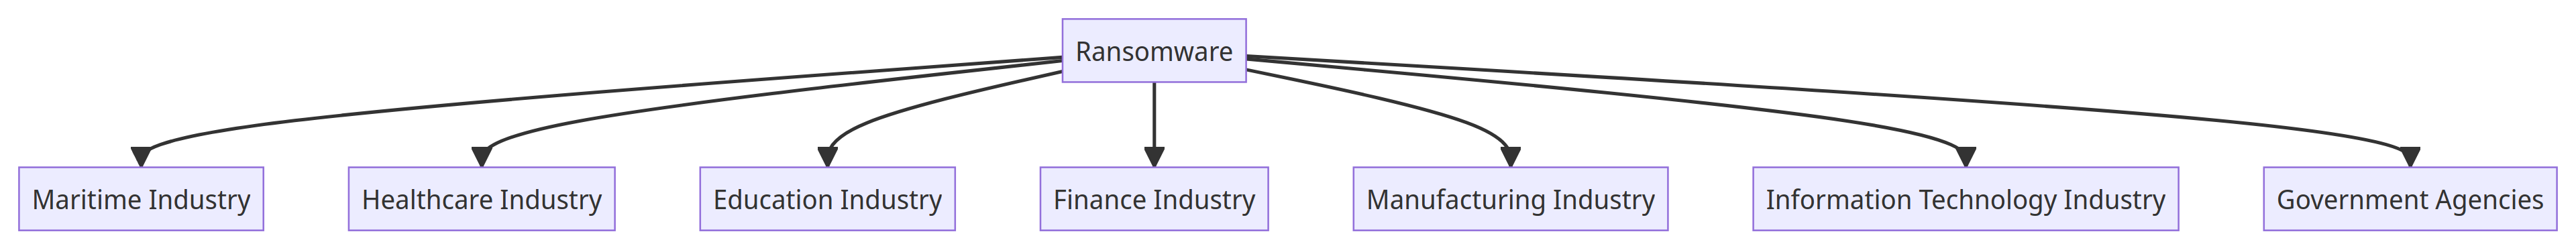 Representation of the industries that ransomware usually targets